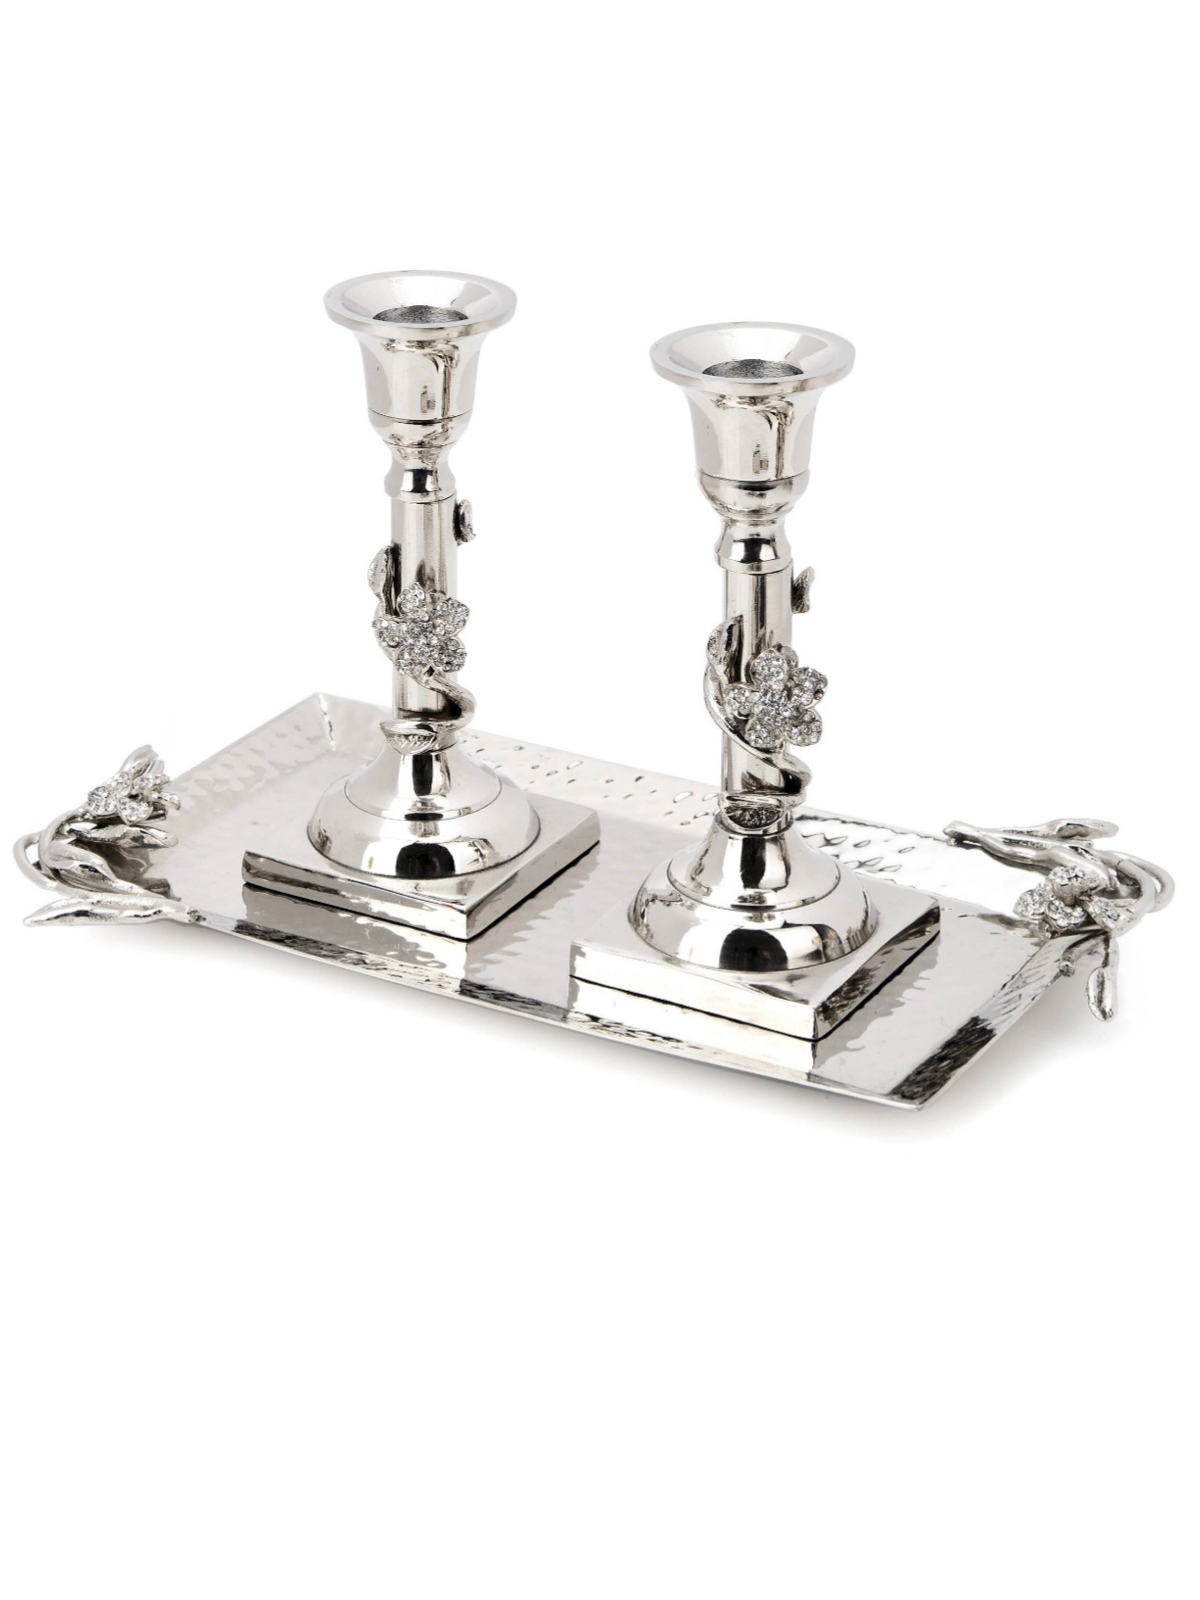 Hammered Stainless Steel Candlestick Holders Set with Silver Jeweled Flower Design - KYA Home Decor.